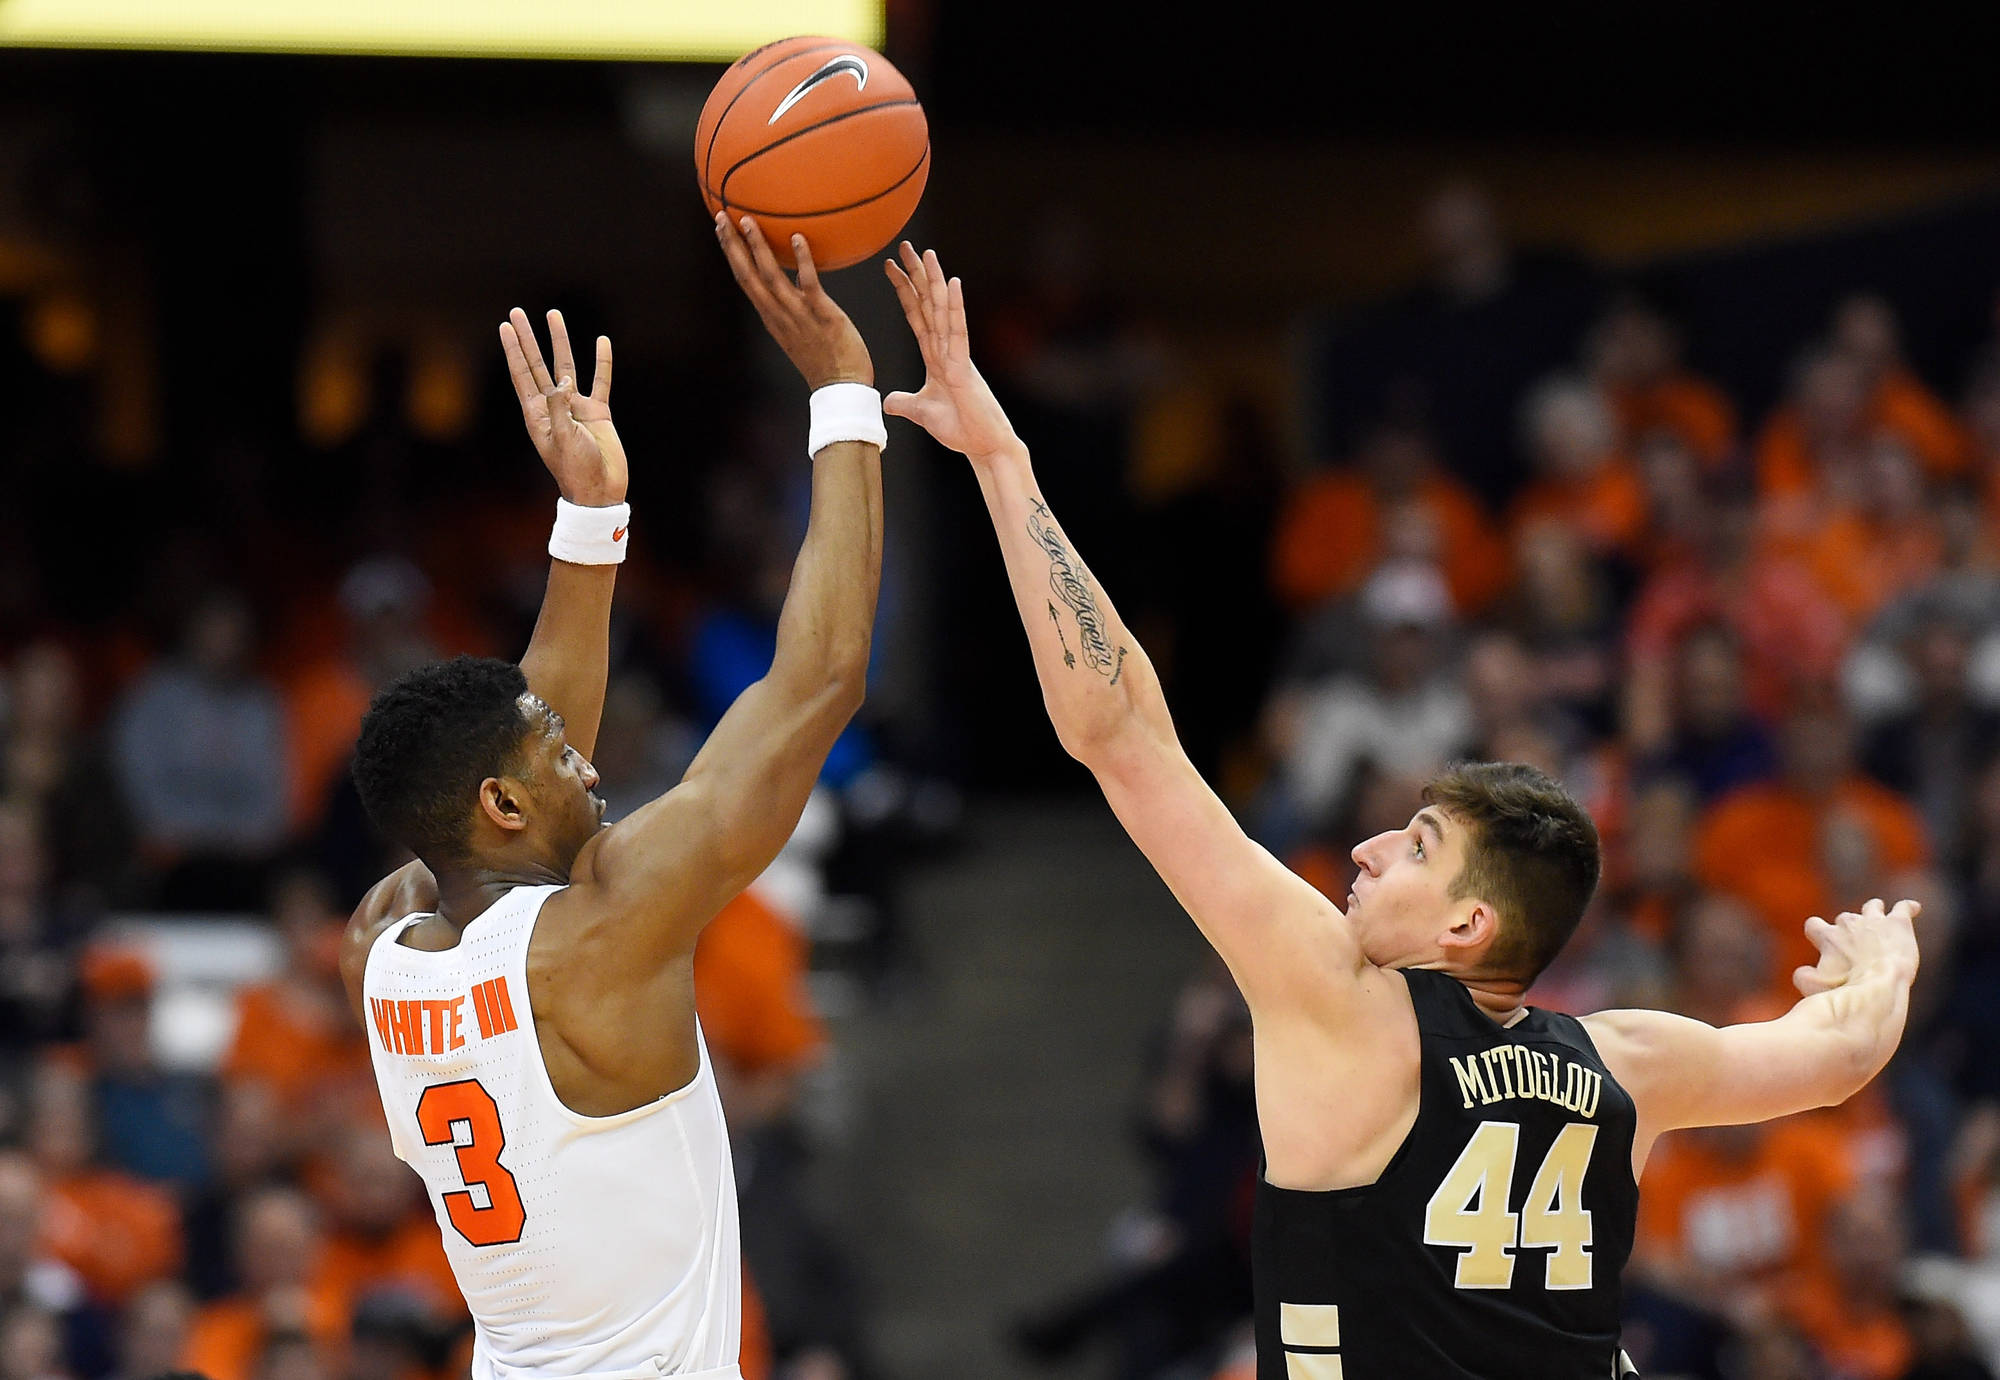 Syracuse's Second Half Comeback leads to a Victory over Wake Forest